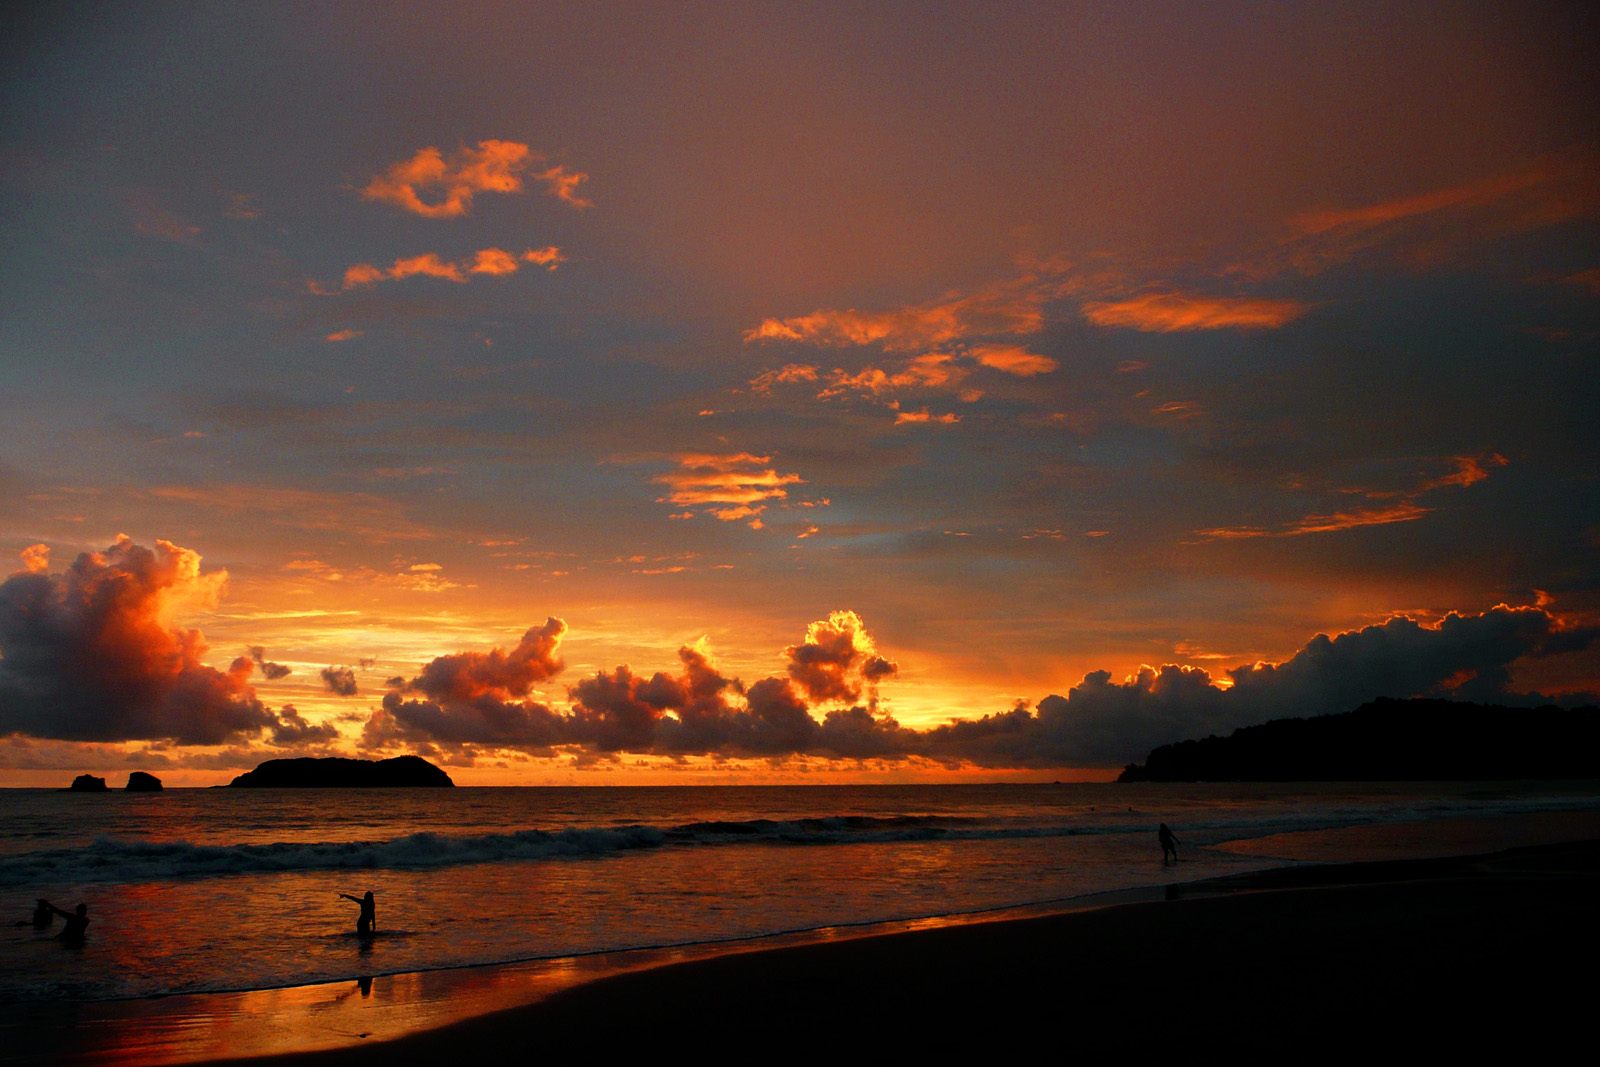 Costa Rica – A Surreal Experience